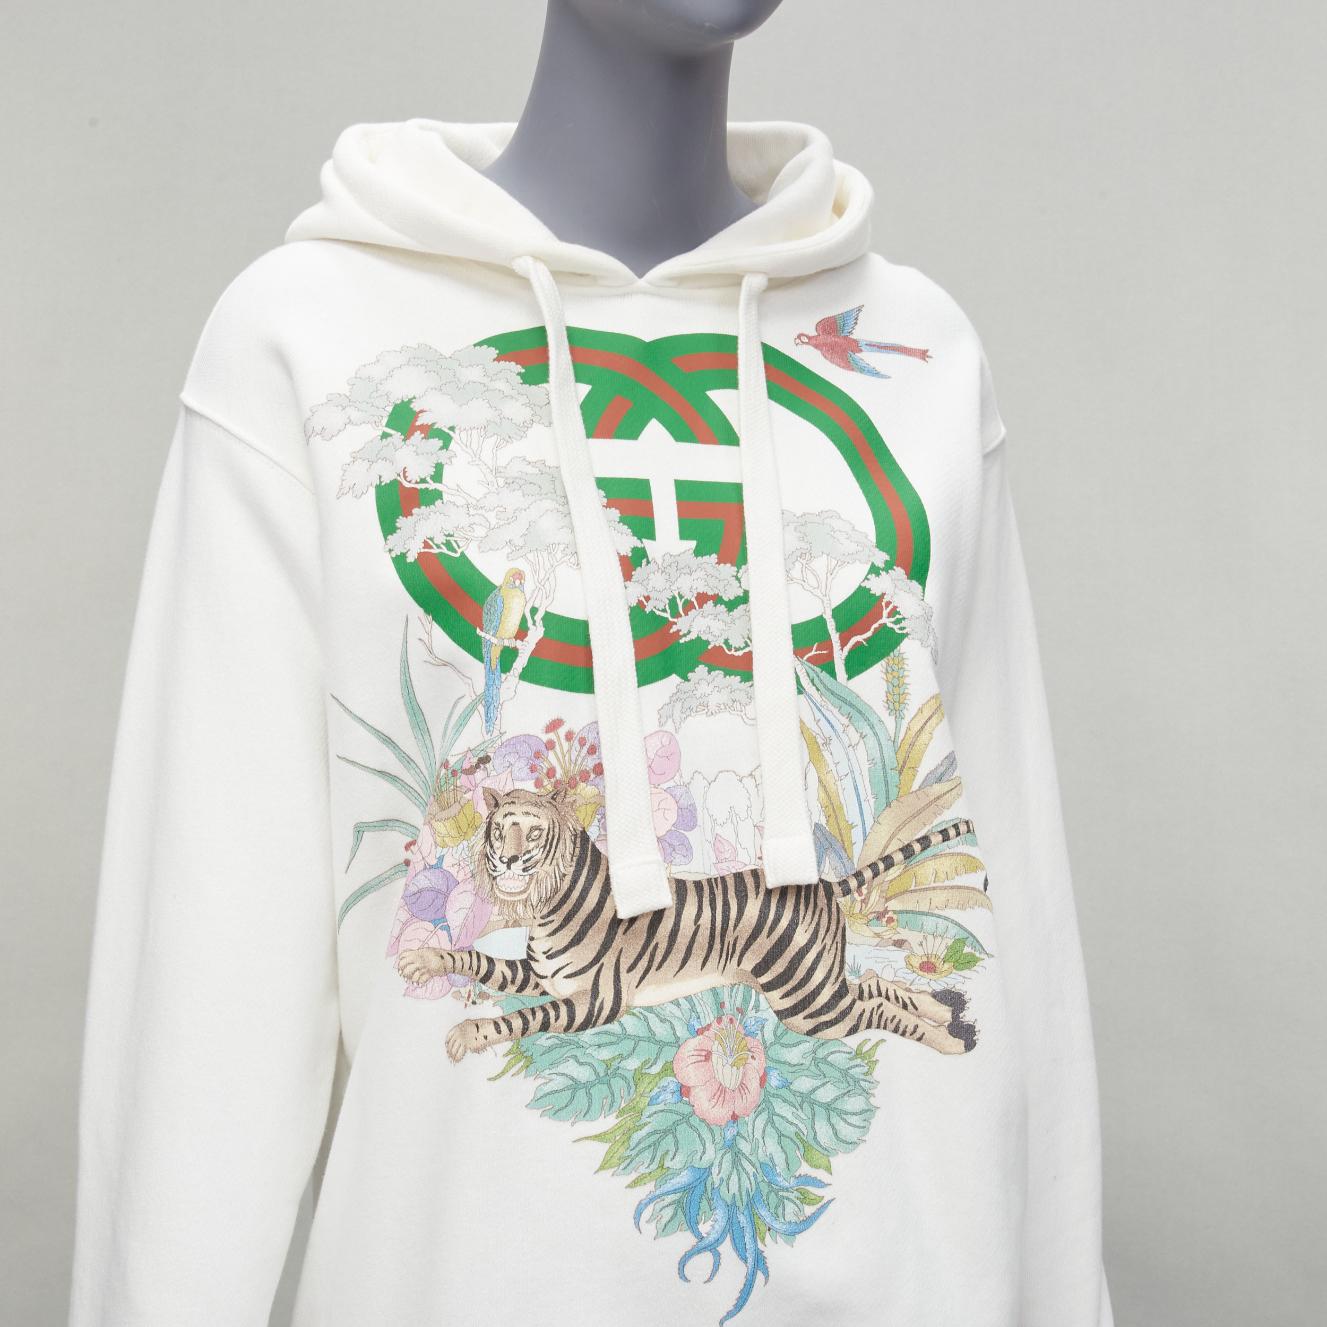 GUCCI green red web GG logo Tiger floral illustration white hoodie sweatshirt XXS
Reference: AAWC/A00483
Brand: Gucci
Designer: Alessandro Michele
Material: Cotton
Color: White, Multicolour
Pattern: Abstract
Closure: Pullover
Made in: